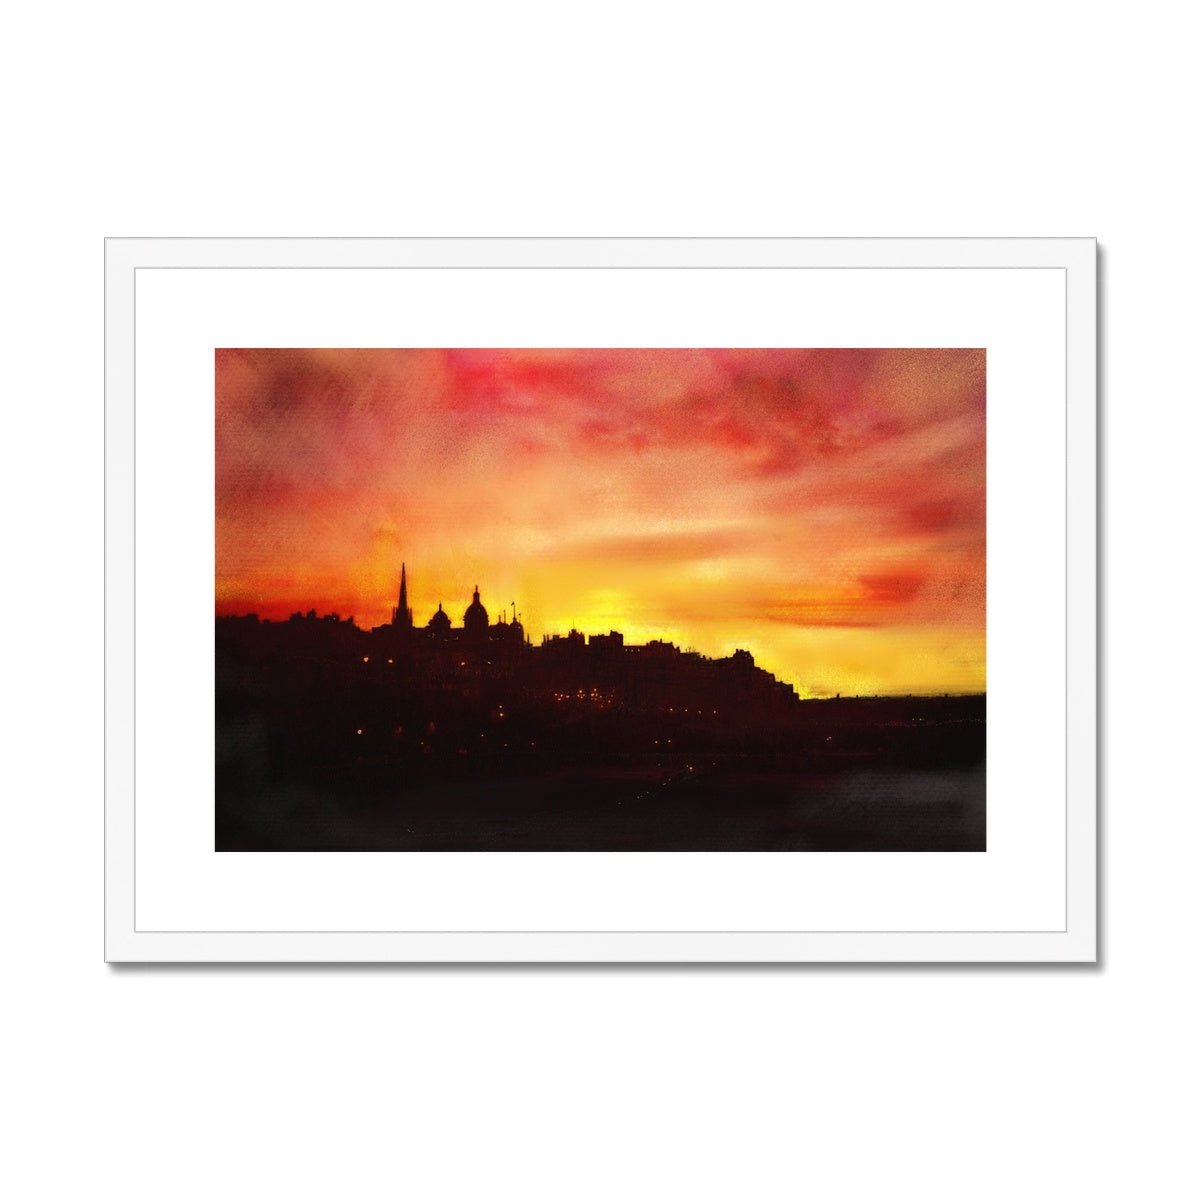 Edinburgh Sunset Painting | Framed & Mounted Prints From Scotland-Framed & Mounted Prints-Edinburgh & Glasgow Art Gallery-A2 Landscape-White Frame-Paintings, Prints, Homeware, Art Gifts From Scotland By Scottish Artist Kevin Hunter